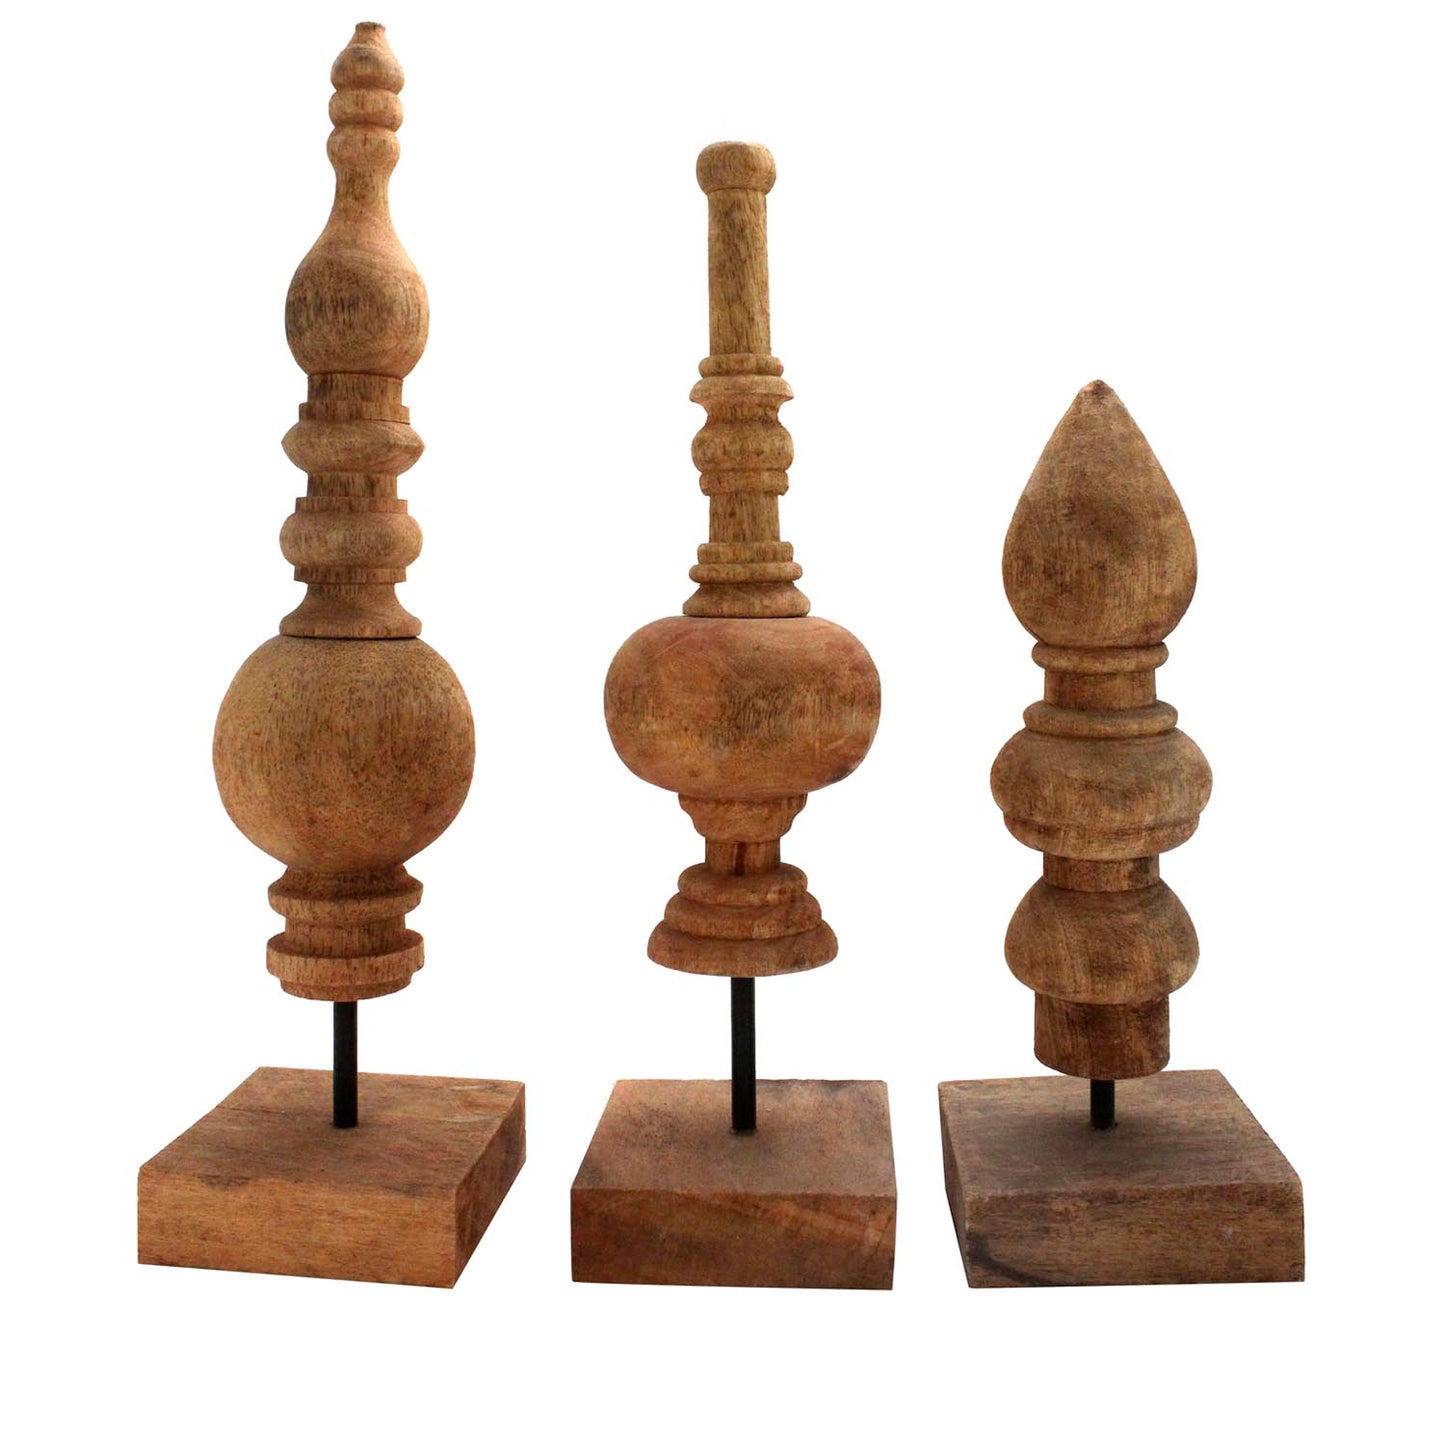 Crestview Collection 16" & 14" & 11" Rustic Wood Museum Object Pilar Tuned Wood Finials In Wood Finish